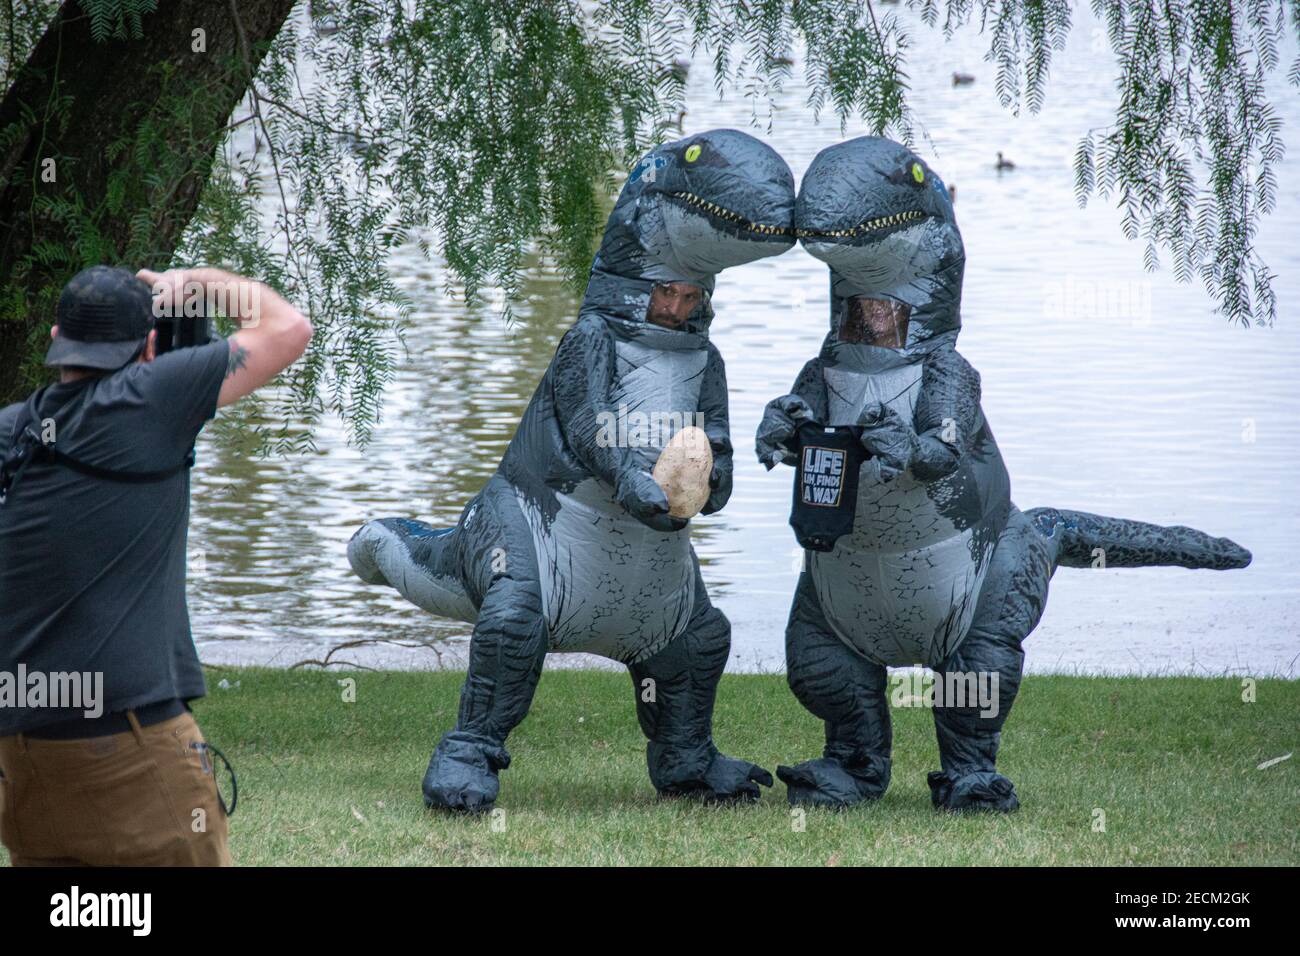 A photographer on a shoot with two men dressed up as dinosaurs. Stock Photo